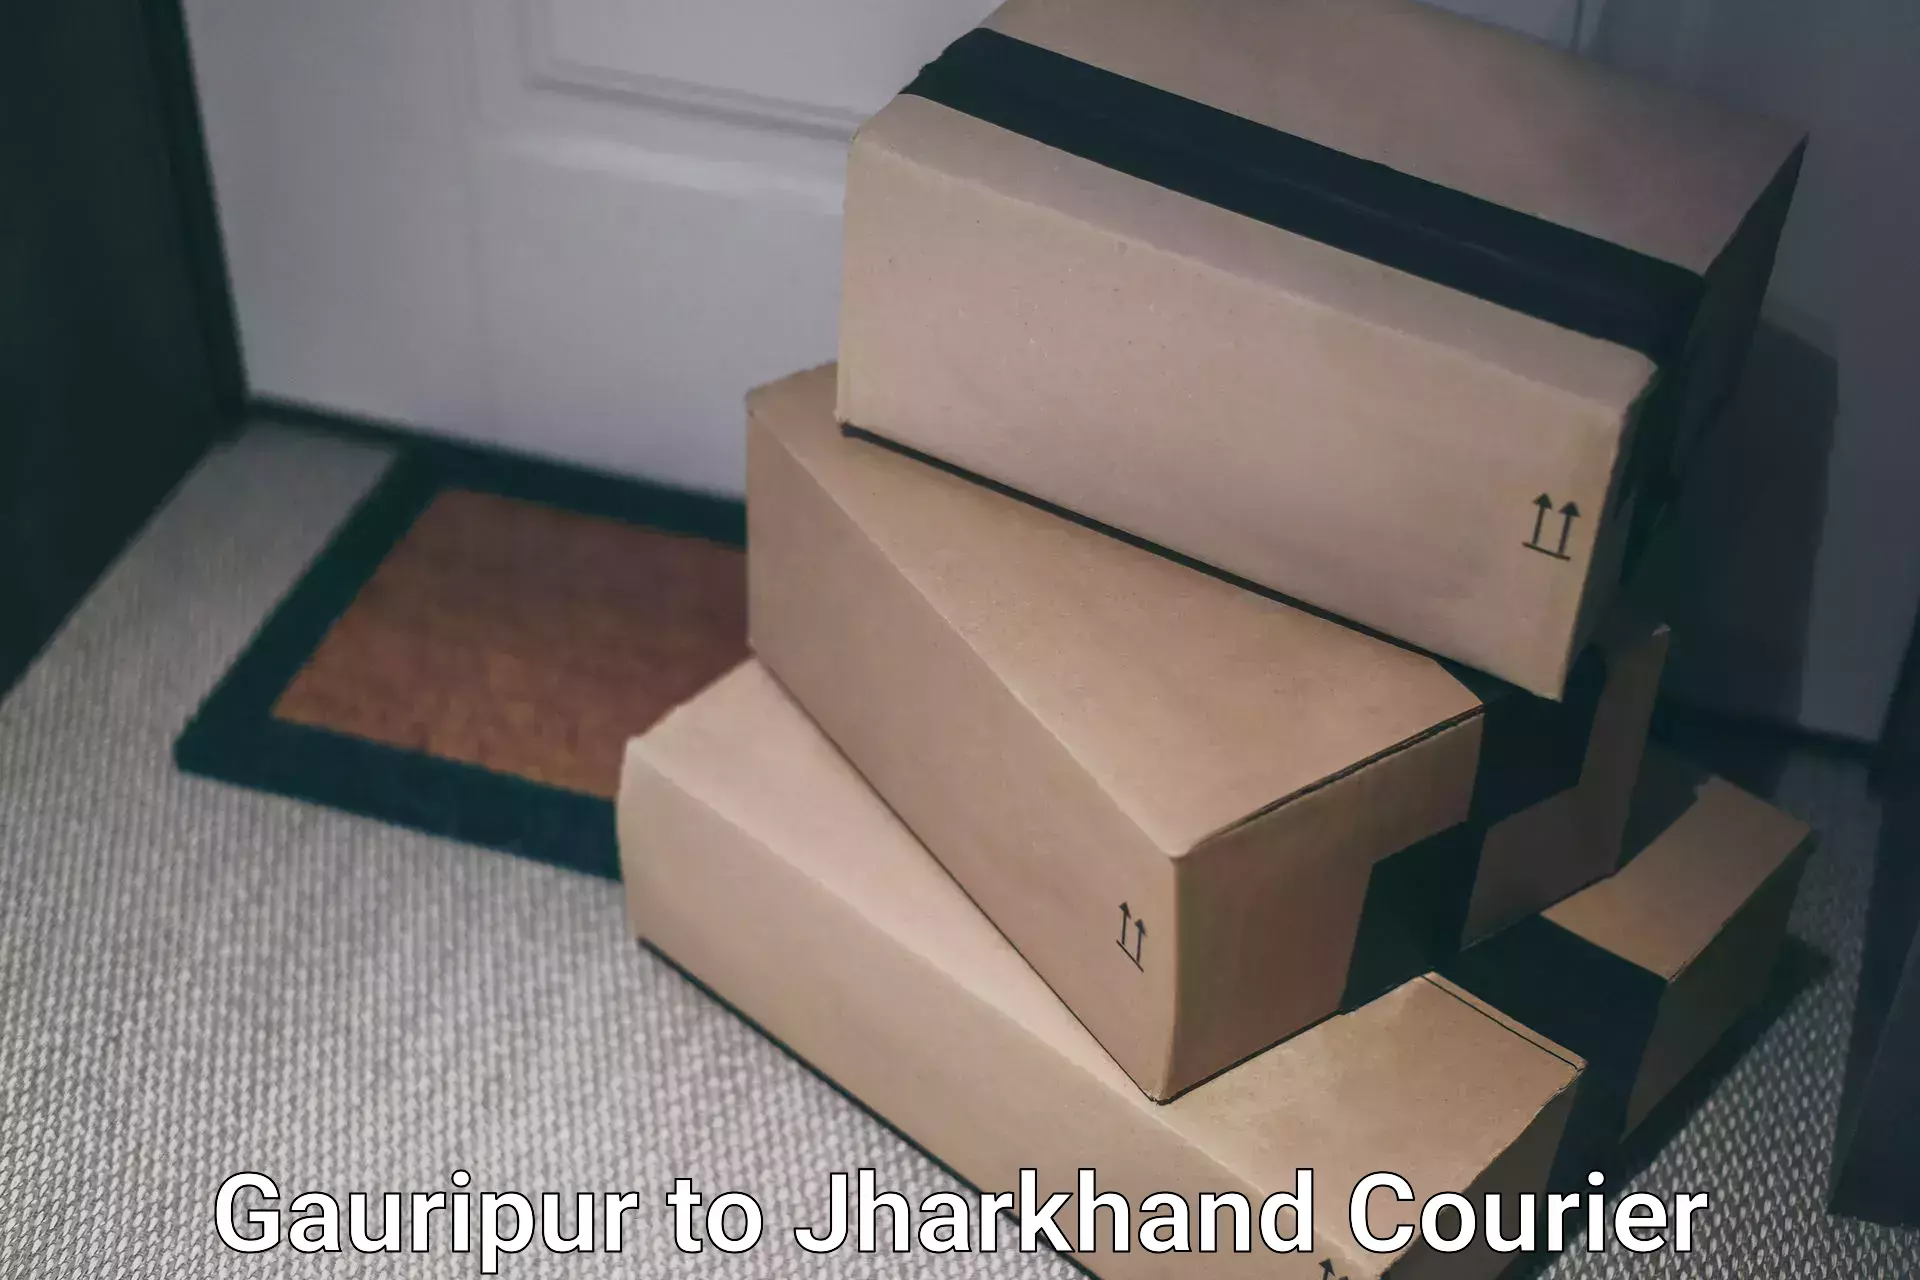 Reliable shipping partners Gauripur to Deoghar